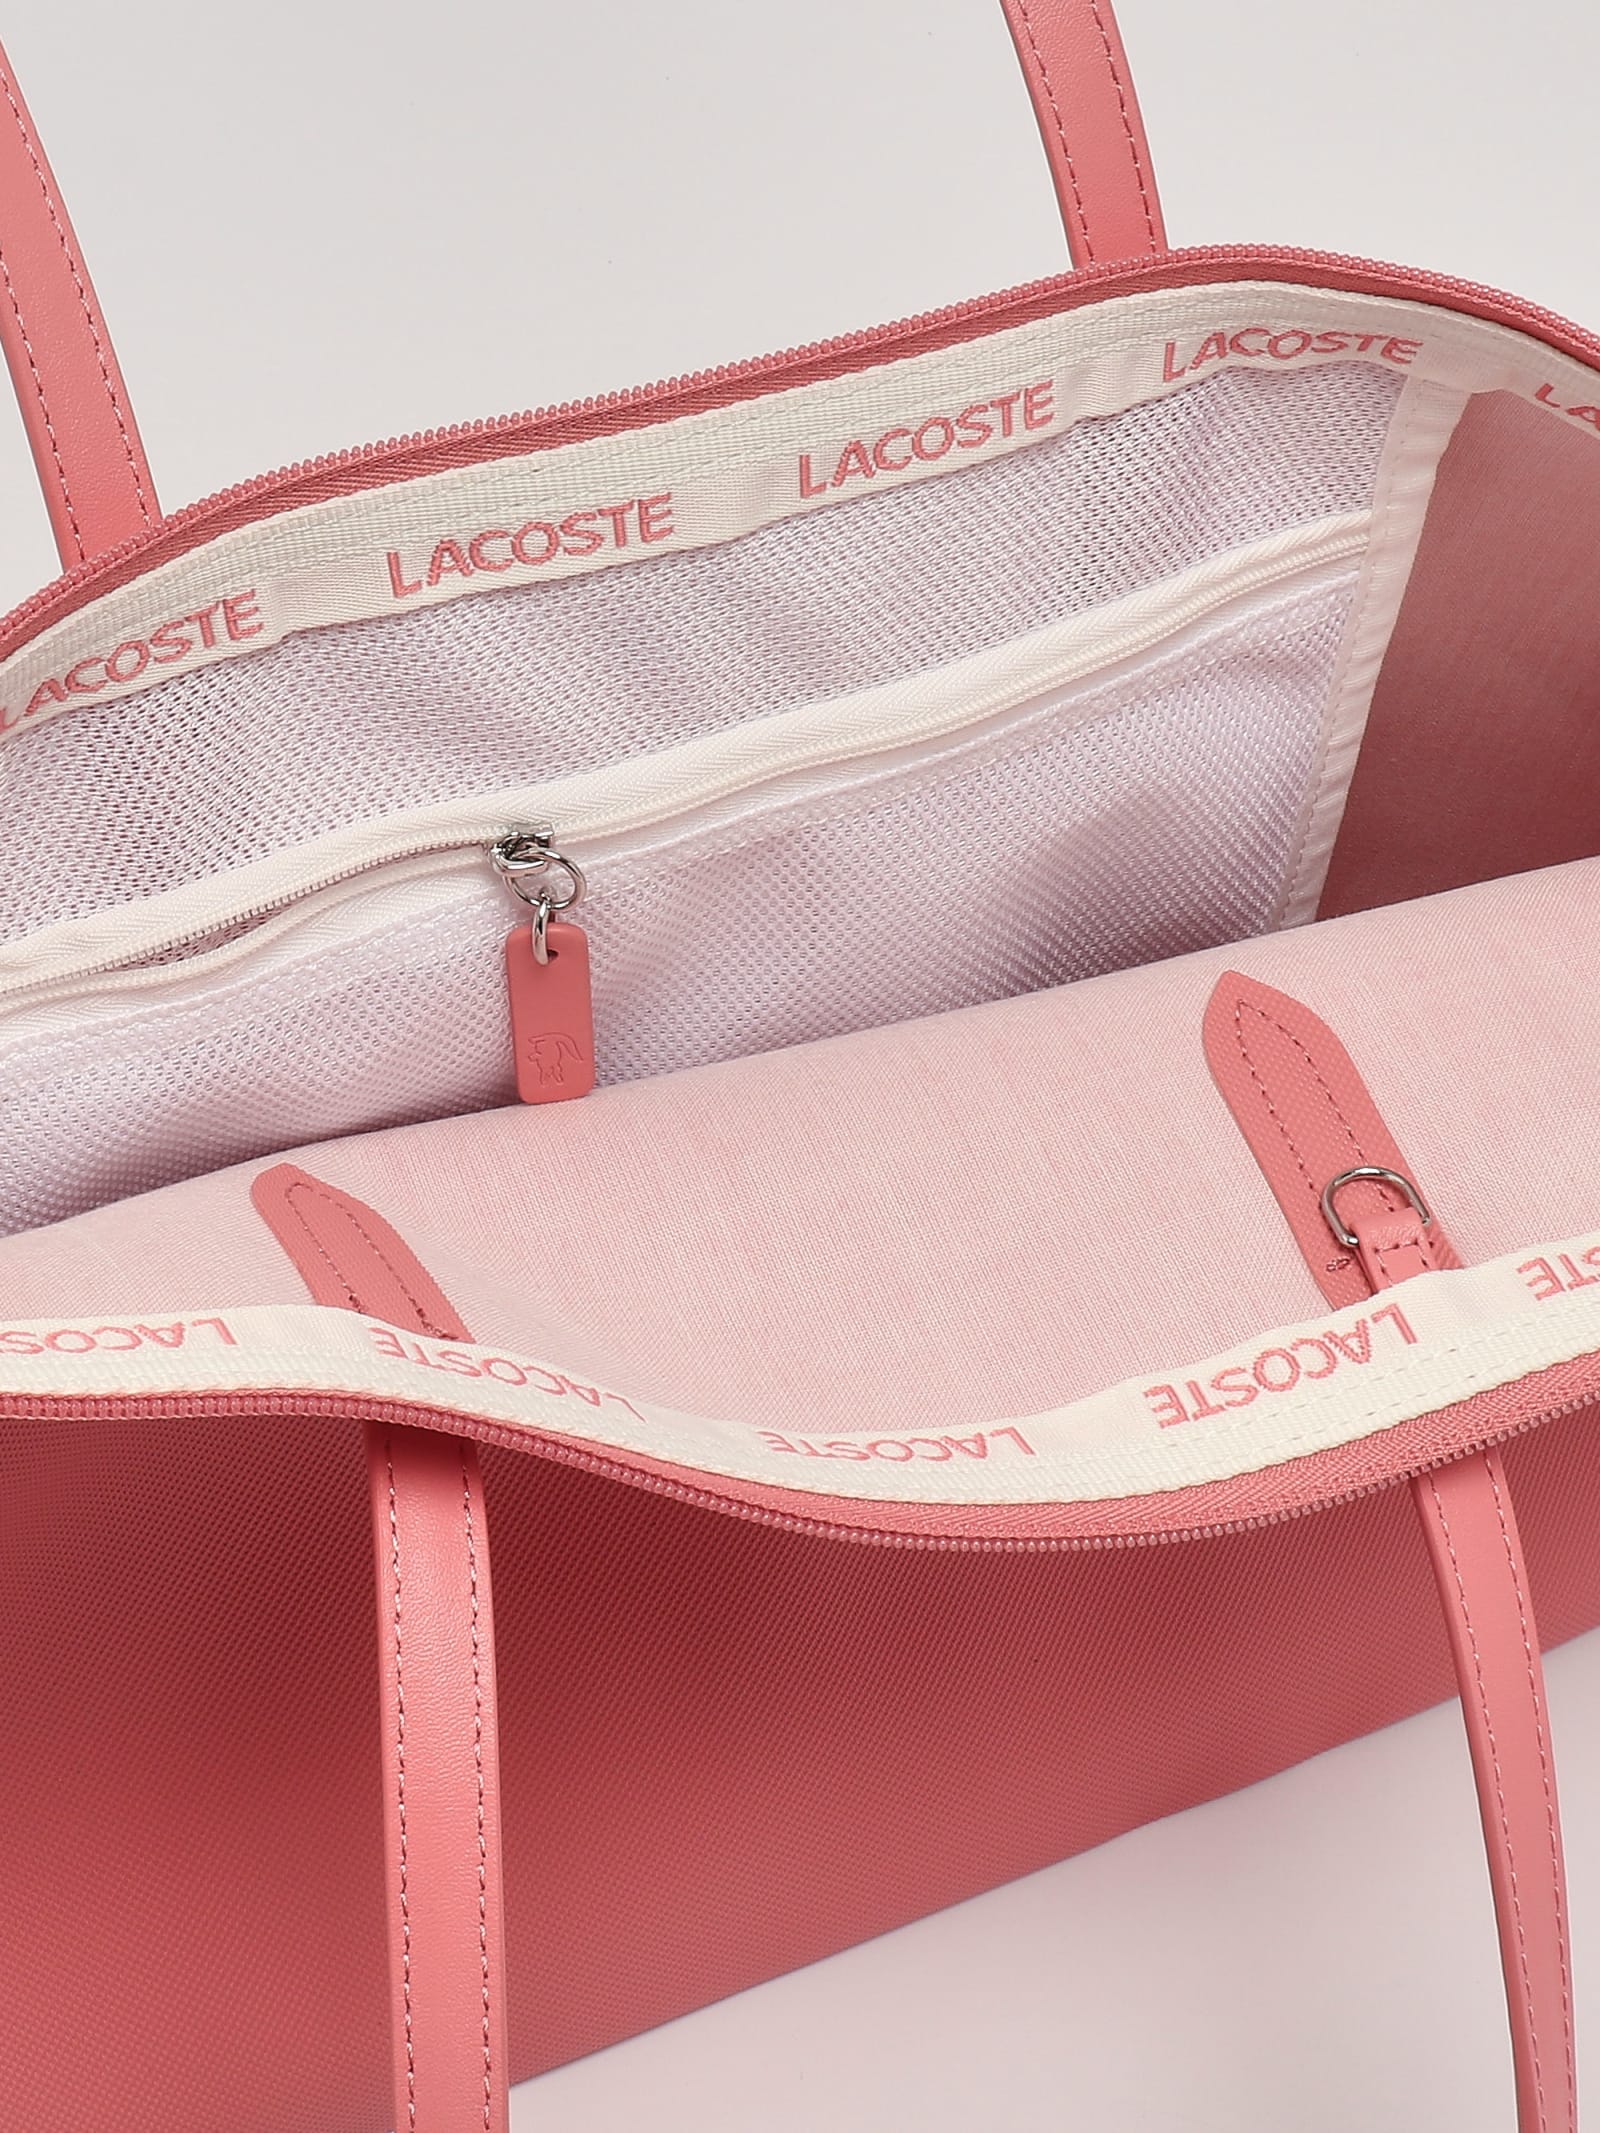 Shop Lacoste Pvc Shopping Bag In Rosa Carico